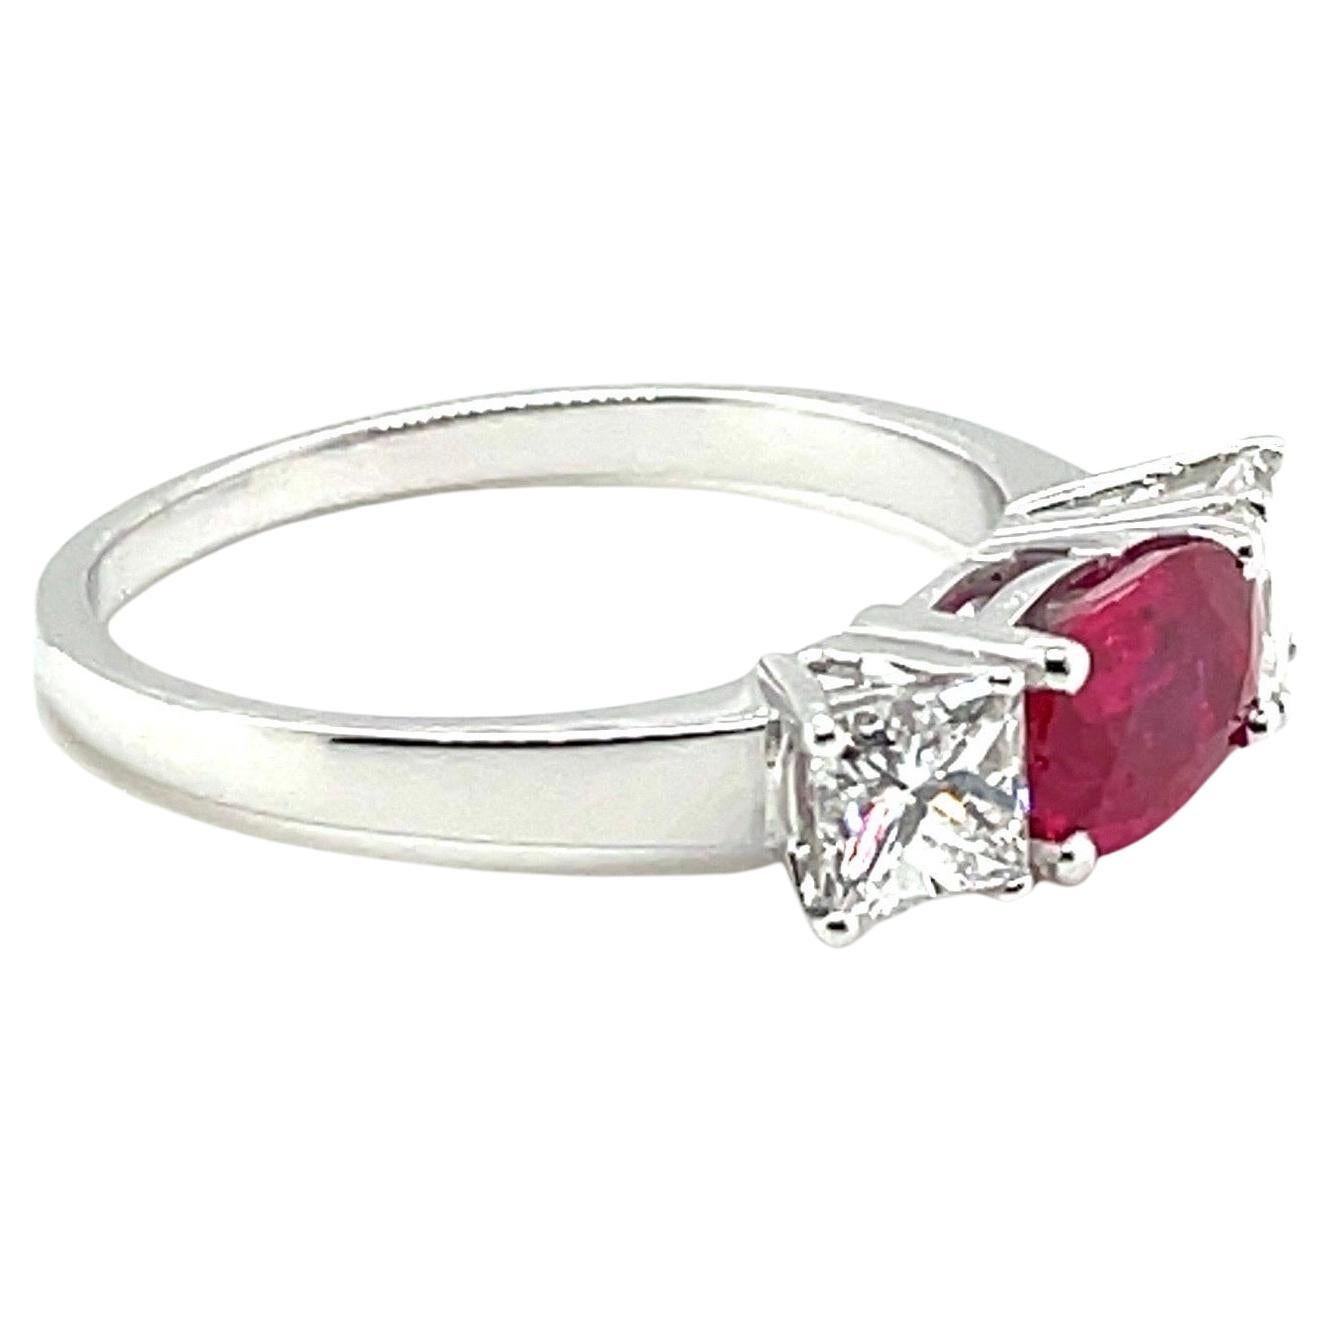 Elegant 18 karat white gold ruby and diamond trilogy ring. 

Delightful ring, centering upon 1 oval pinkish-red ruby of circa 1.10 carats, flanked by 2 princess-cut diamonds totalling circa 0.95 carats.  

This beautiful and timeless ring has